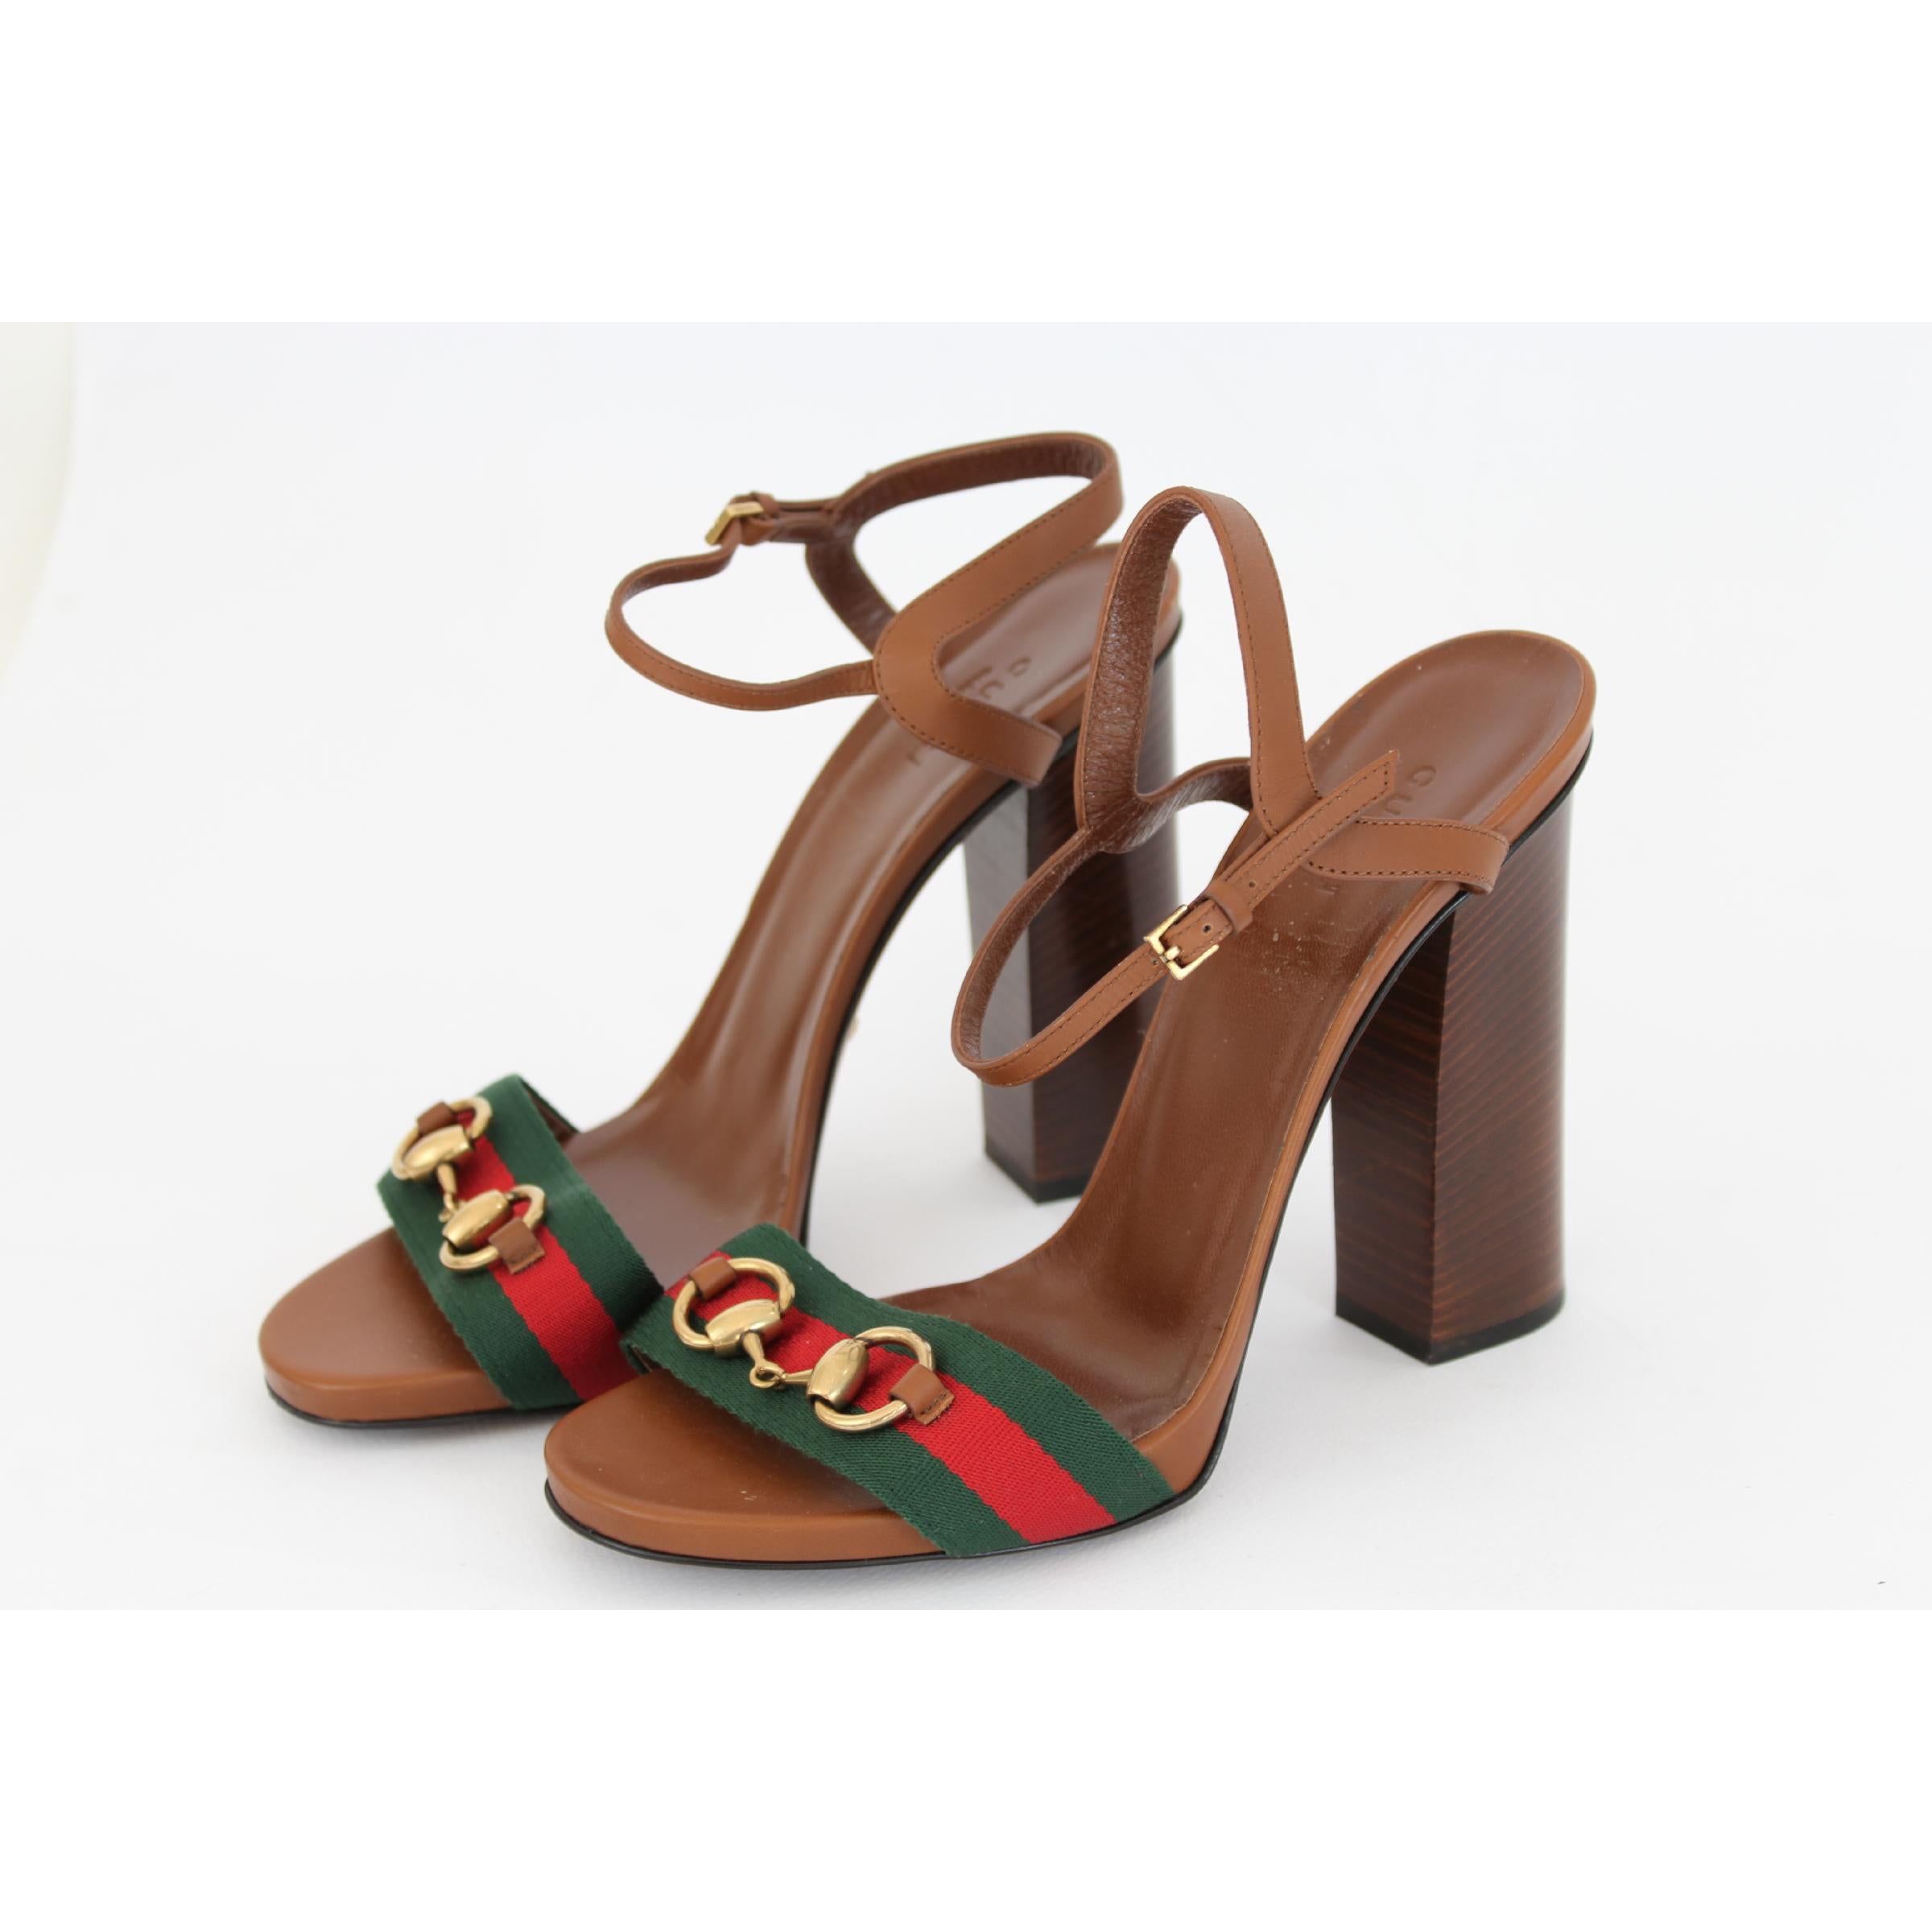 Gucci women's shoes, lifford model, brown, 100% leather, green and red band in canvas. Square high heel. New without labels. Made in Italy.

Size: 39 It 8.5 Us 6 Uk
Heel: 13 cm
Internal length: 25.5 cm